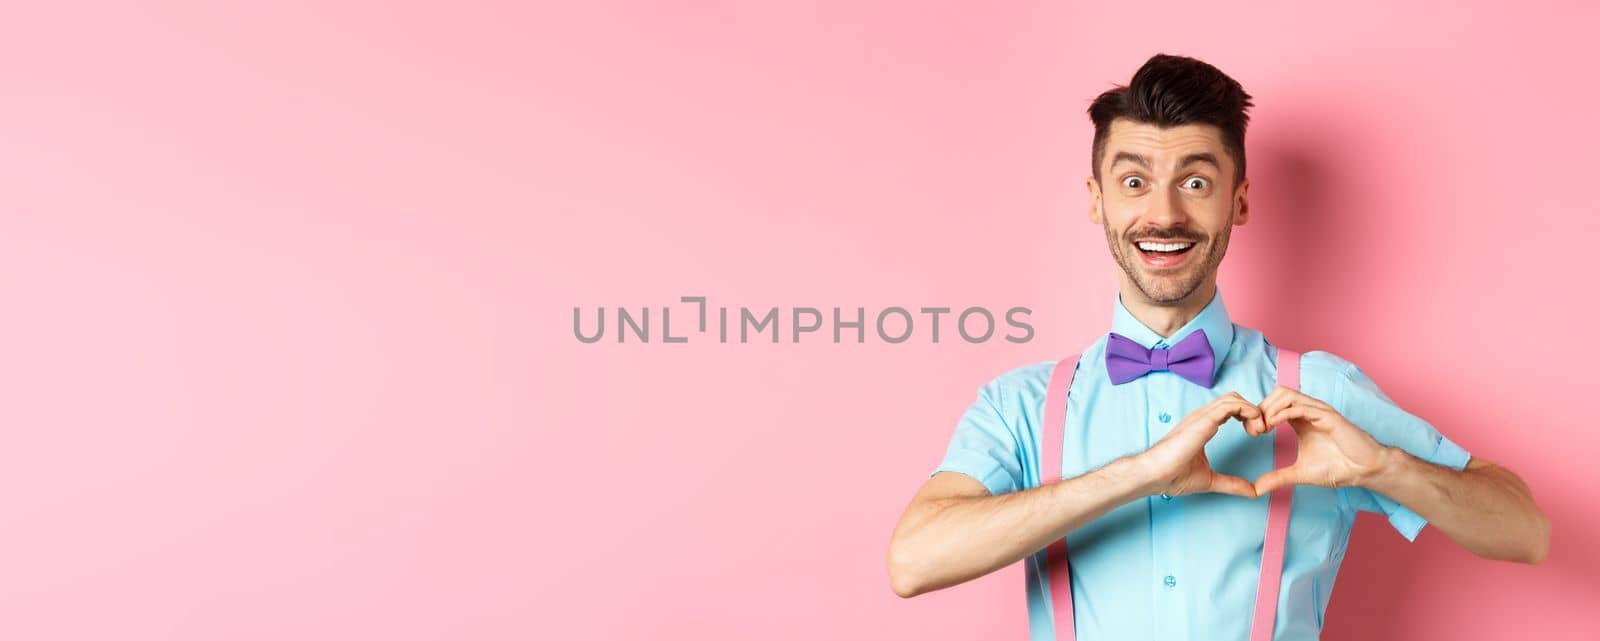 Passionate guy in funny bow tie saying I love you, showing heart gesture on Valentines day and smiling, expressing sympathy to lover, standing over pink background.